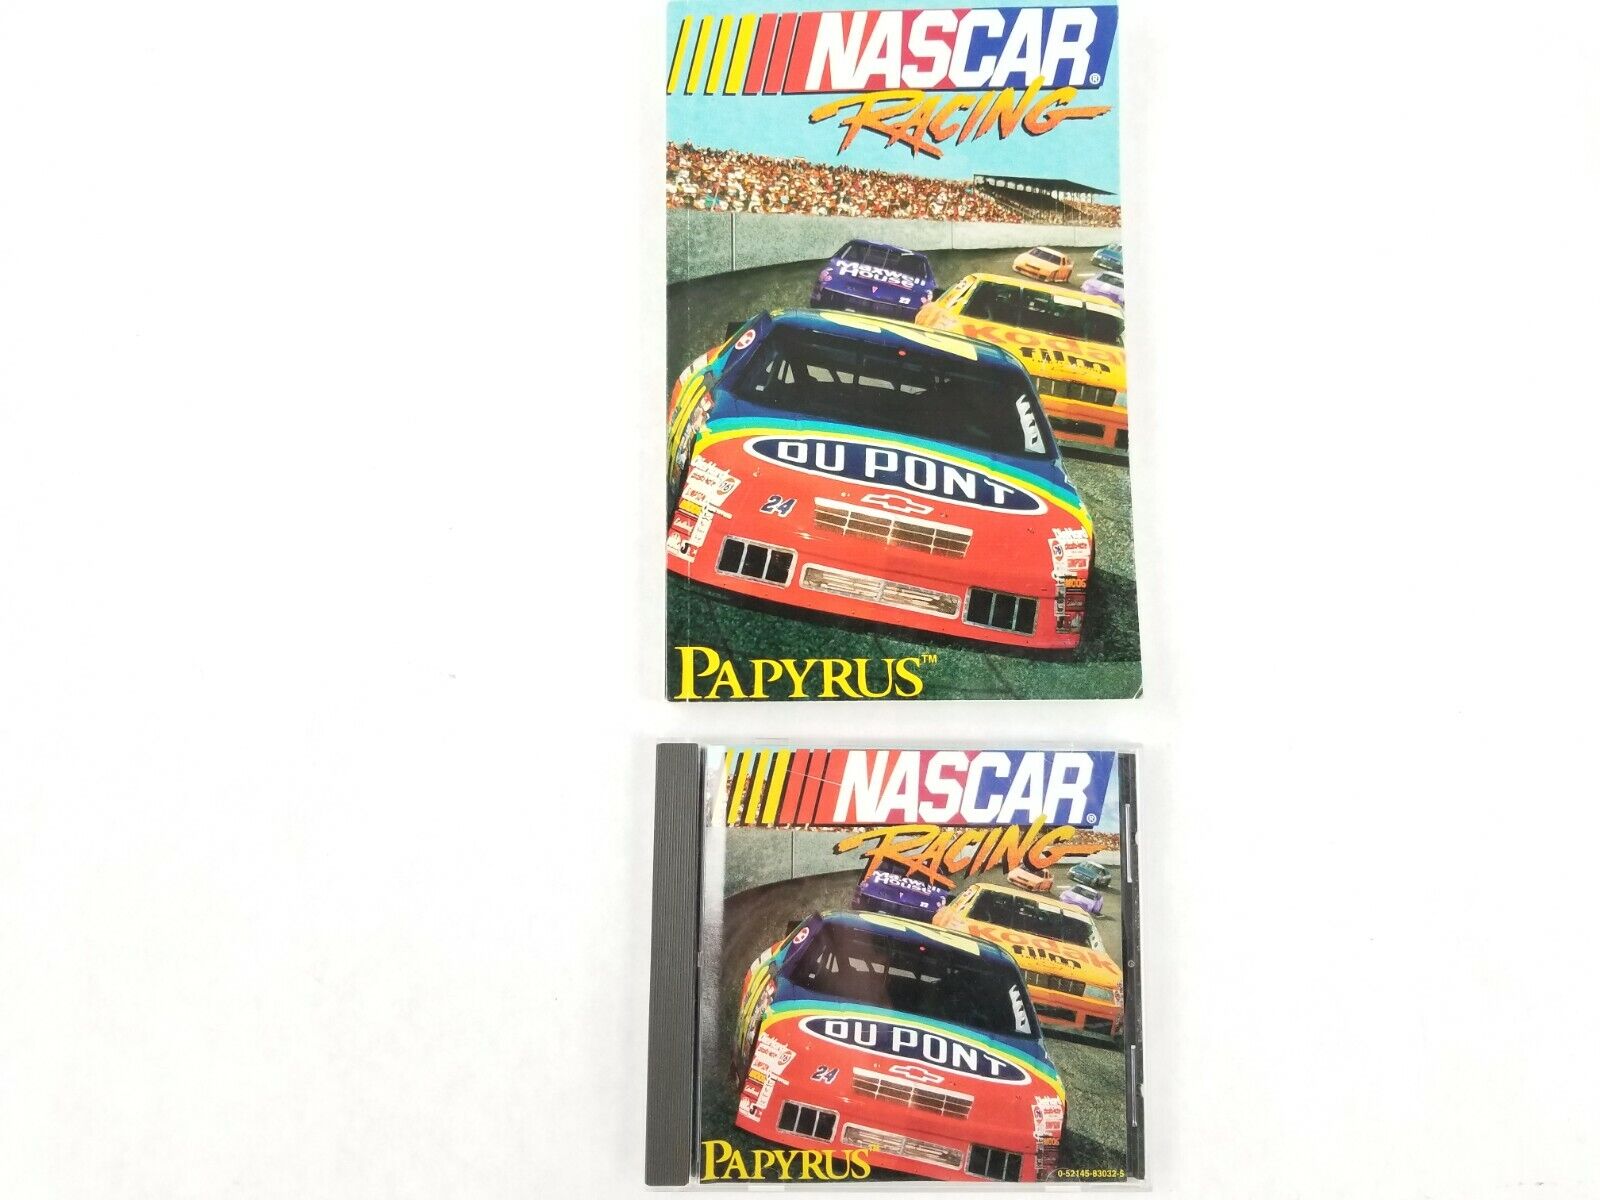 NASCAR Racing (Papyrus, 1994) - PC Windows CD-ROM With Manual and Box